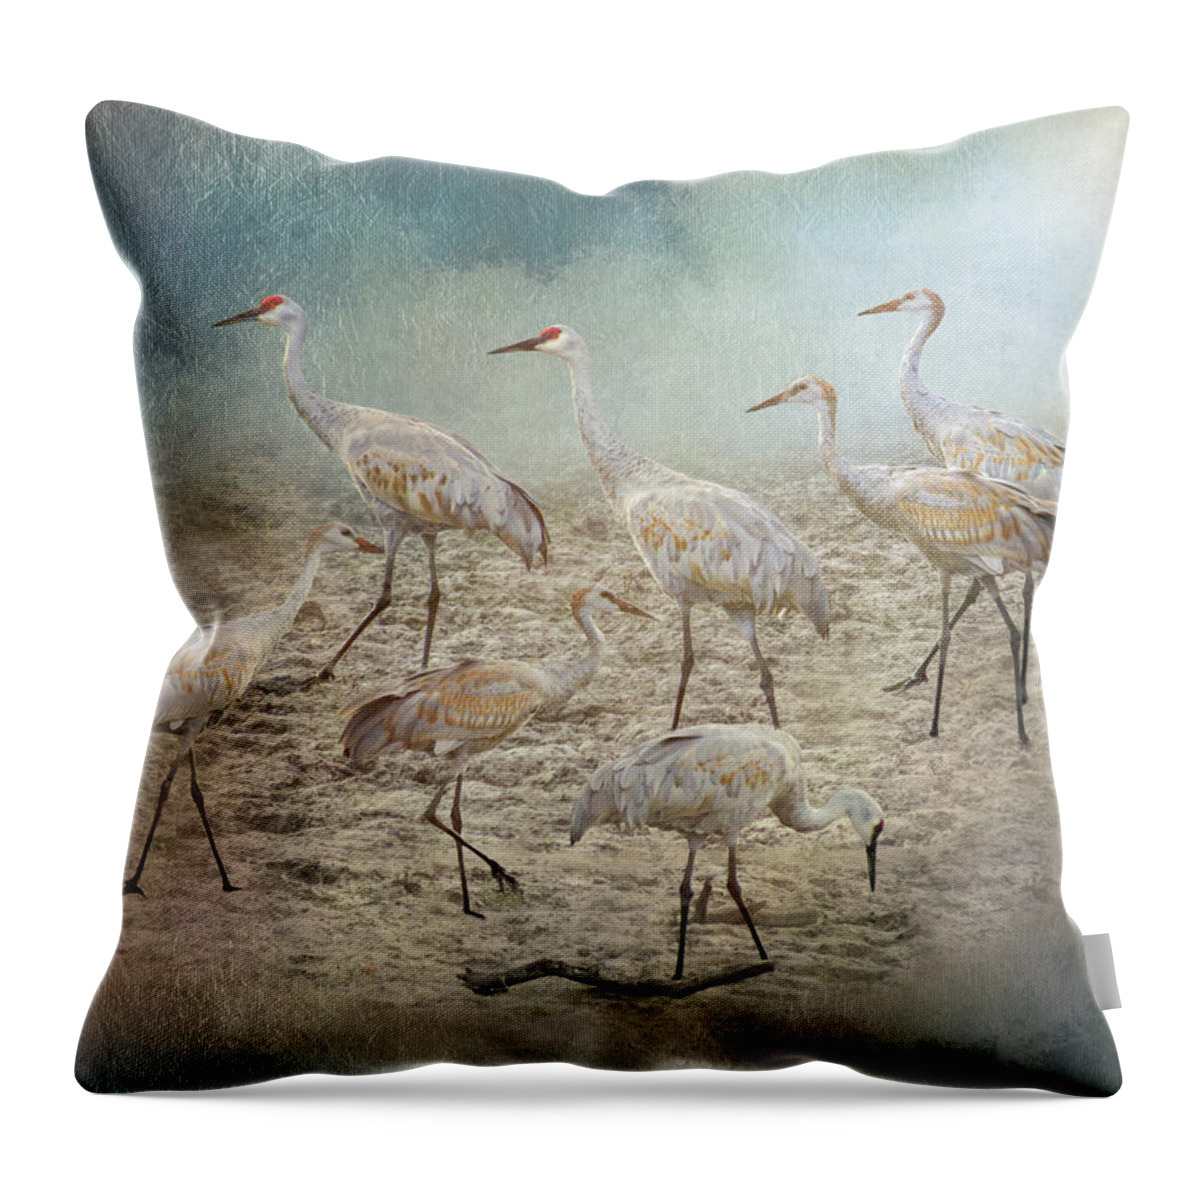 Birds Throw Pillow featuring the photograph Sandhill Crane Beach Gathering by Patti Deters